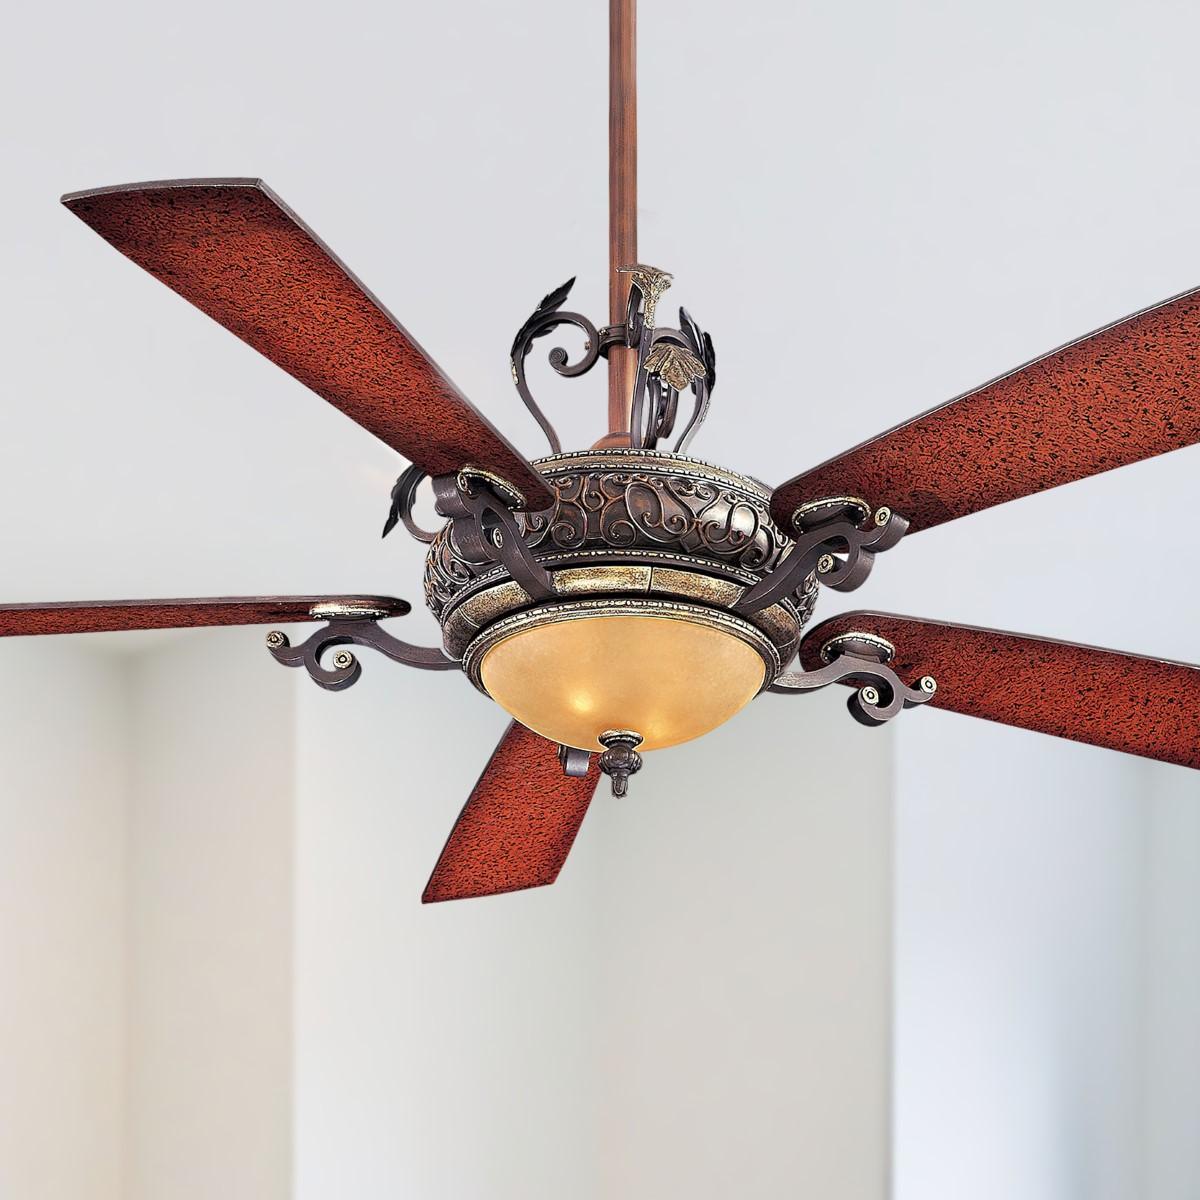 Napoli 56 Inch Ceiling Fan With Light, Sterling Walnut Finish, Wall Control Included